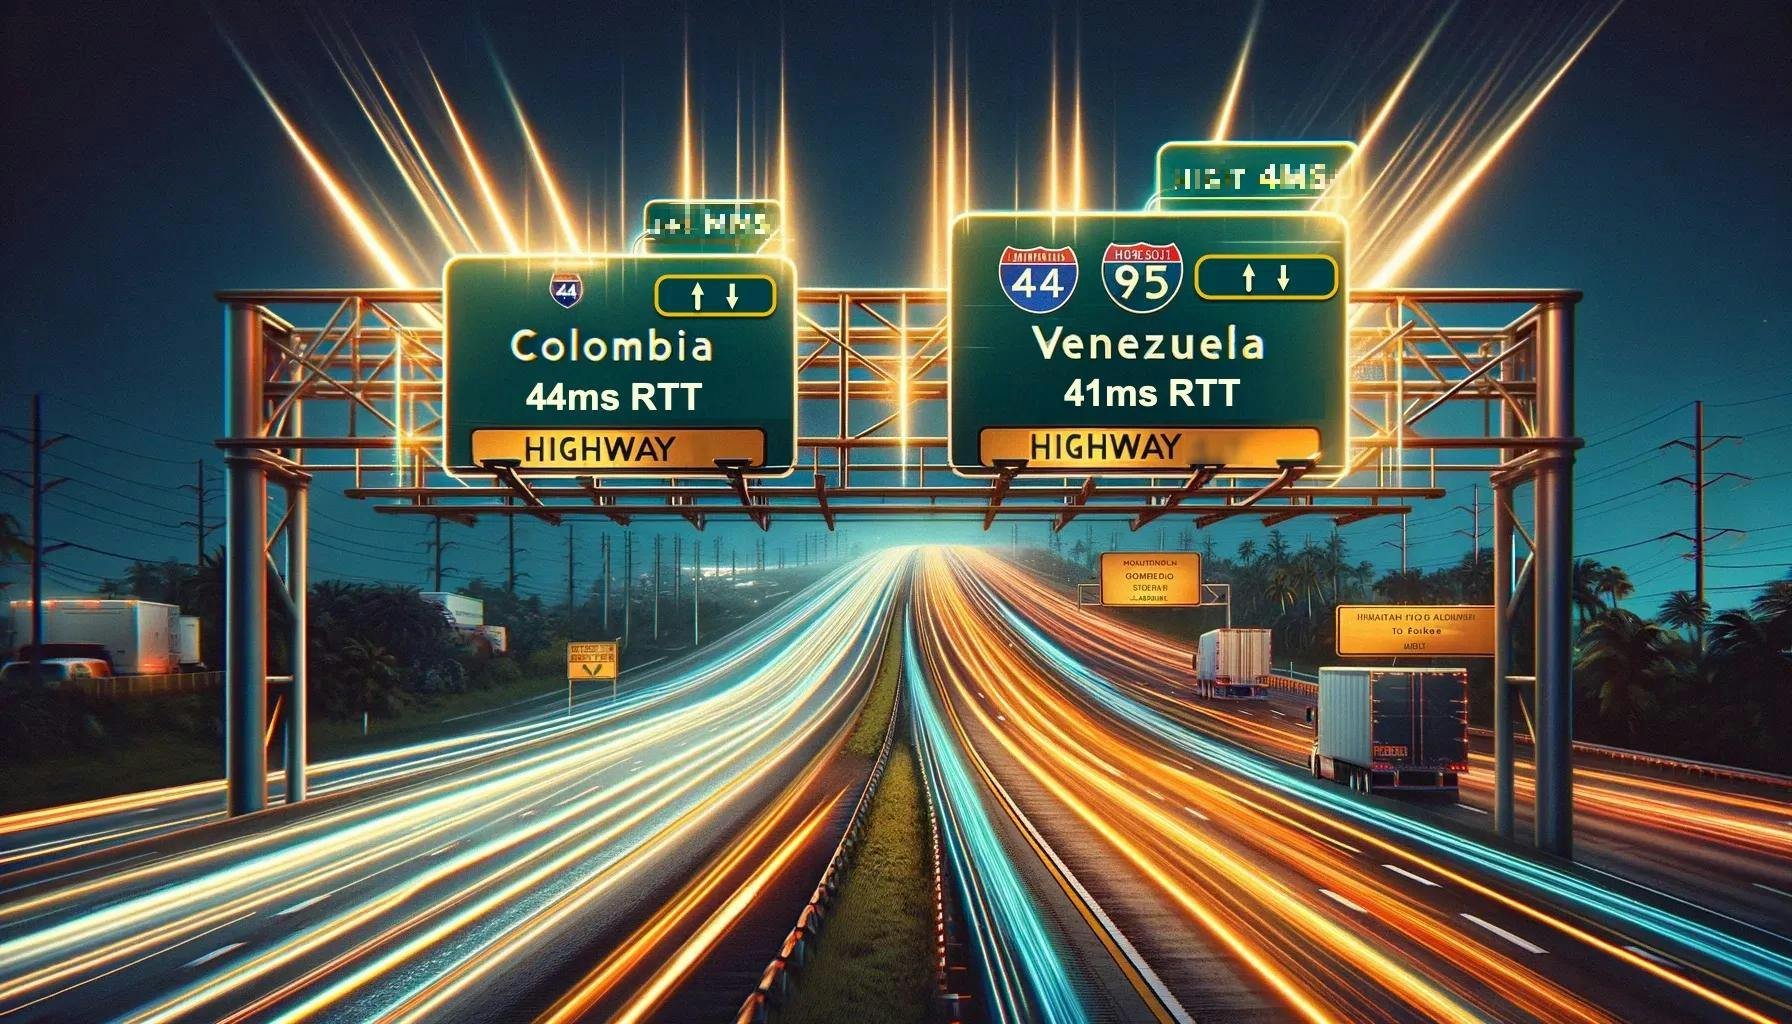 VPS Hosting Miami: Ultra Low Latency to Latin America - 44ms to Colombia, 41ms to Venezuela.